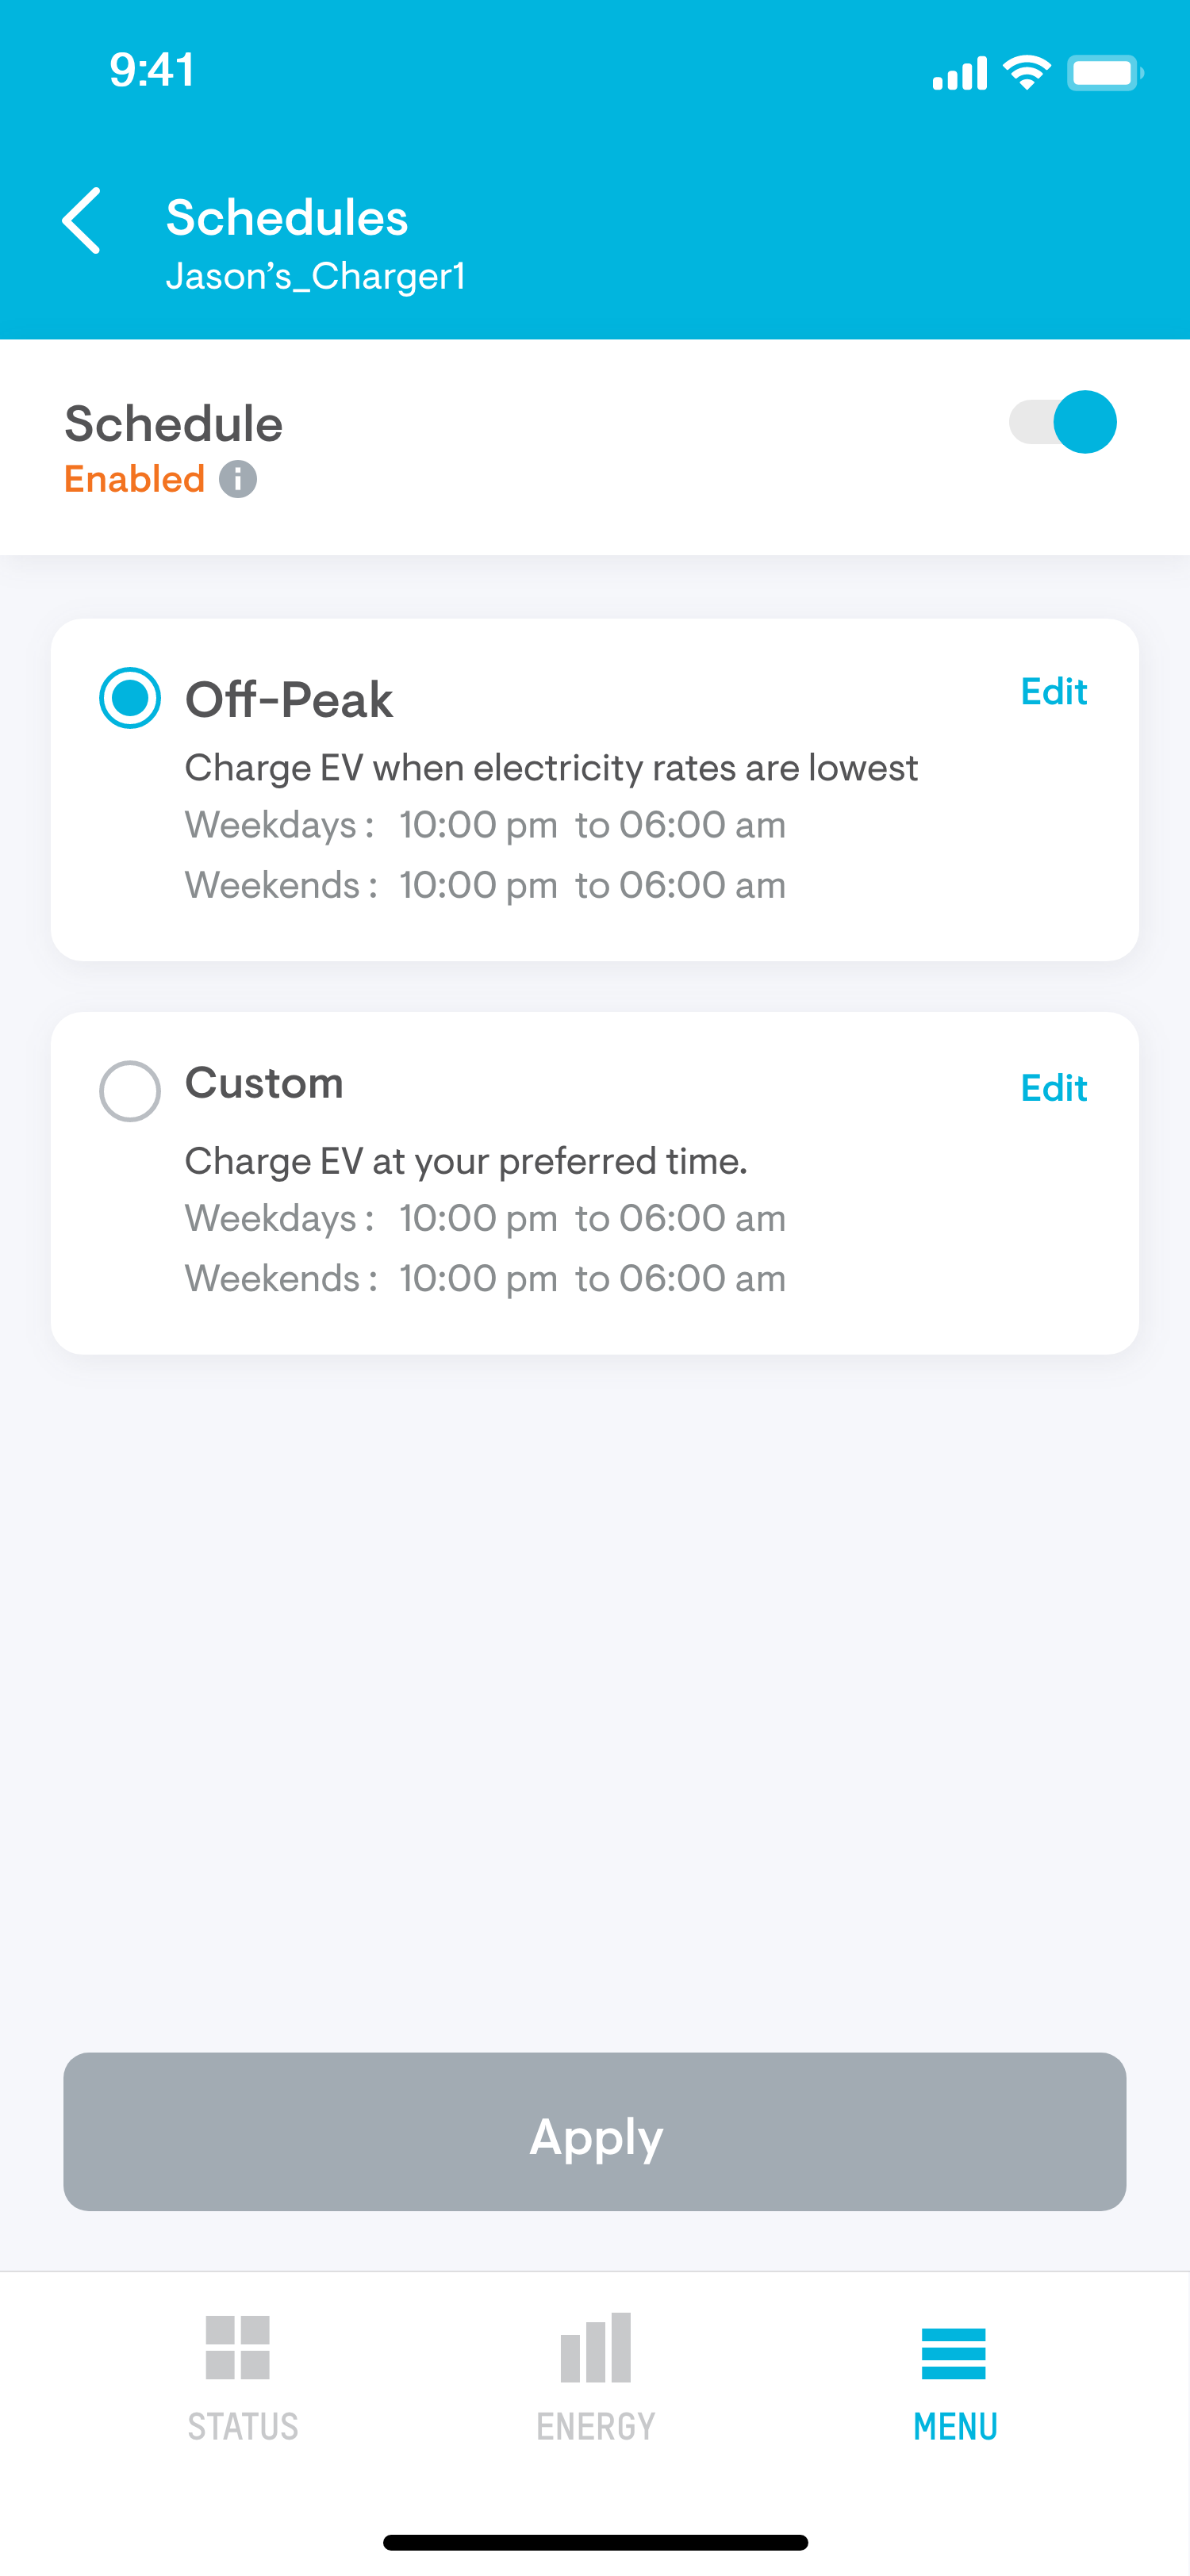 Schedule view of the Enphase Energy App